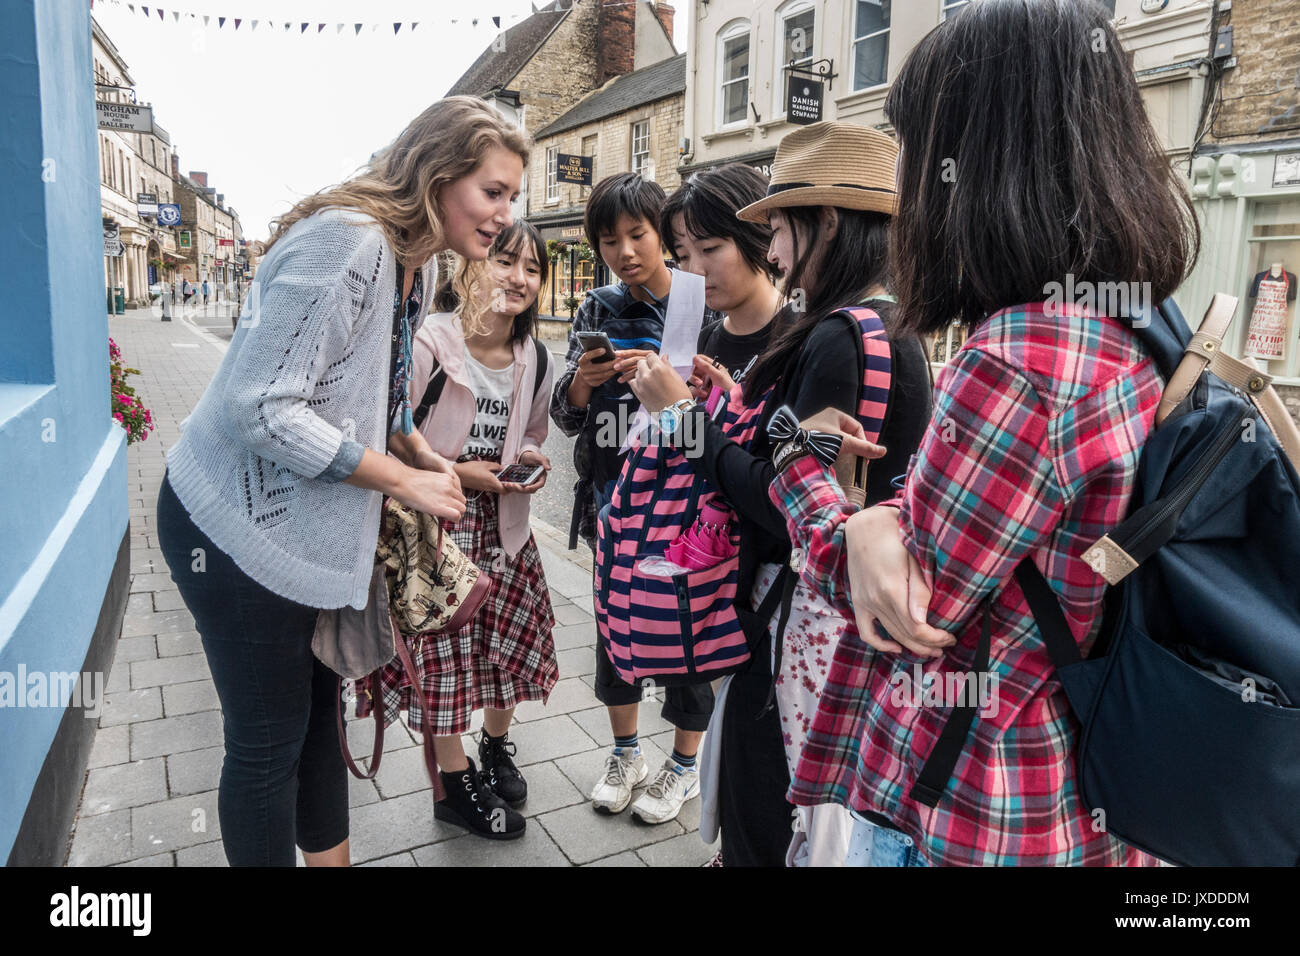 A pretty young English woman being asked for local information by a group of Japanese tourists, centre of Cirencester, Gloucestershire, England, UK. Stock Photo